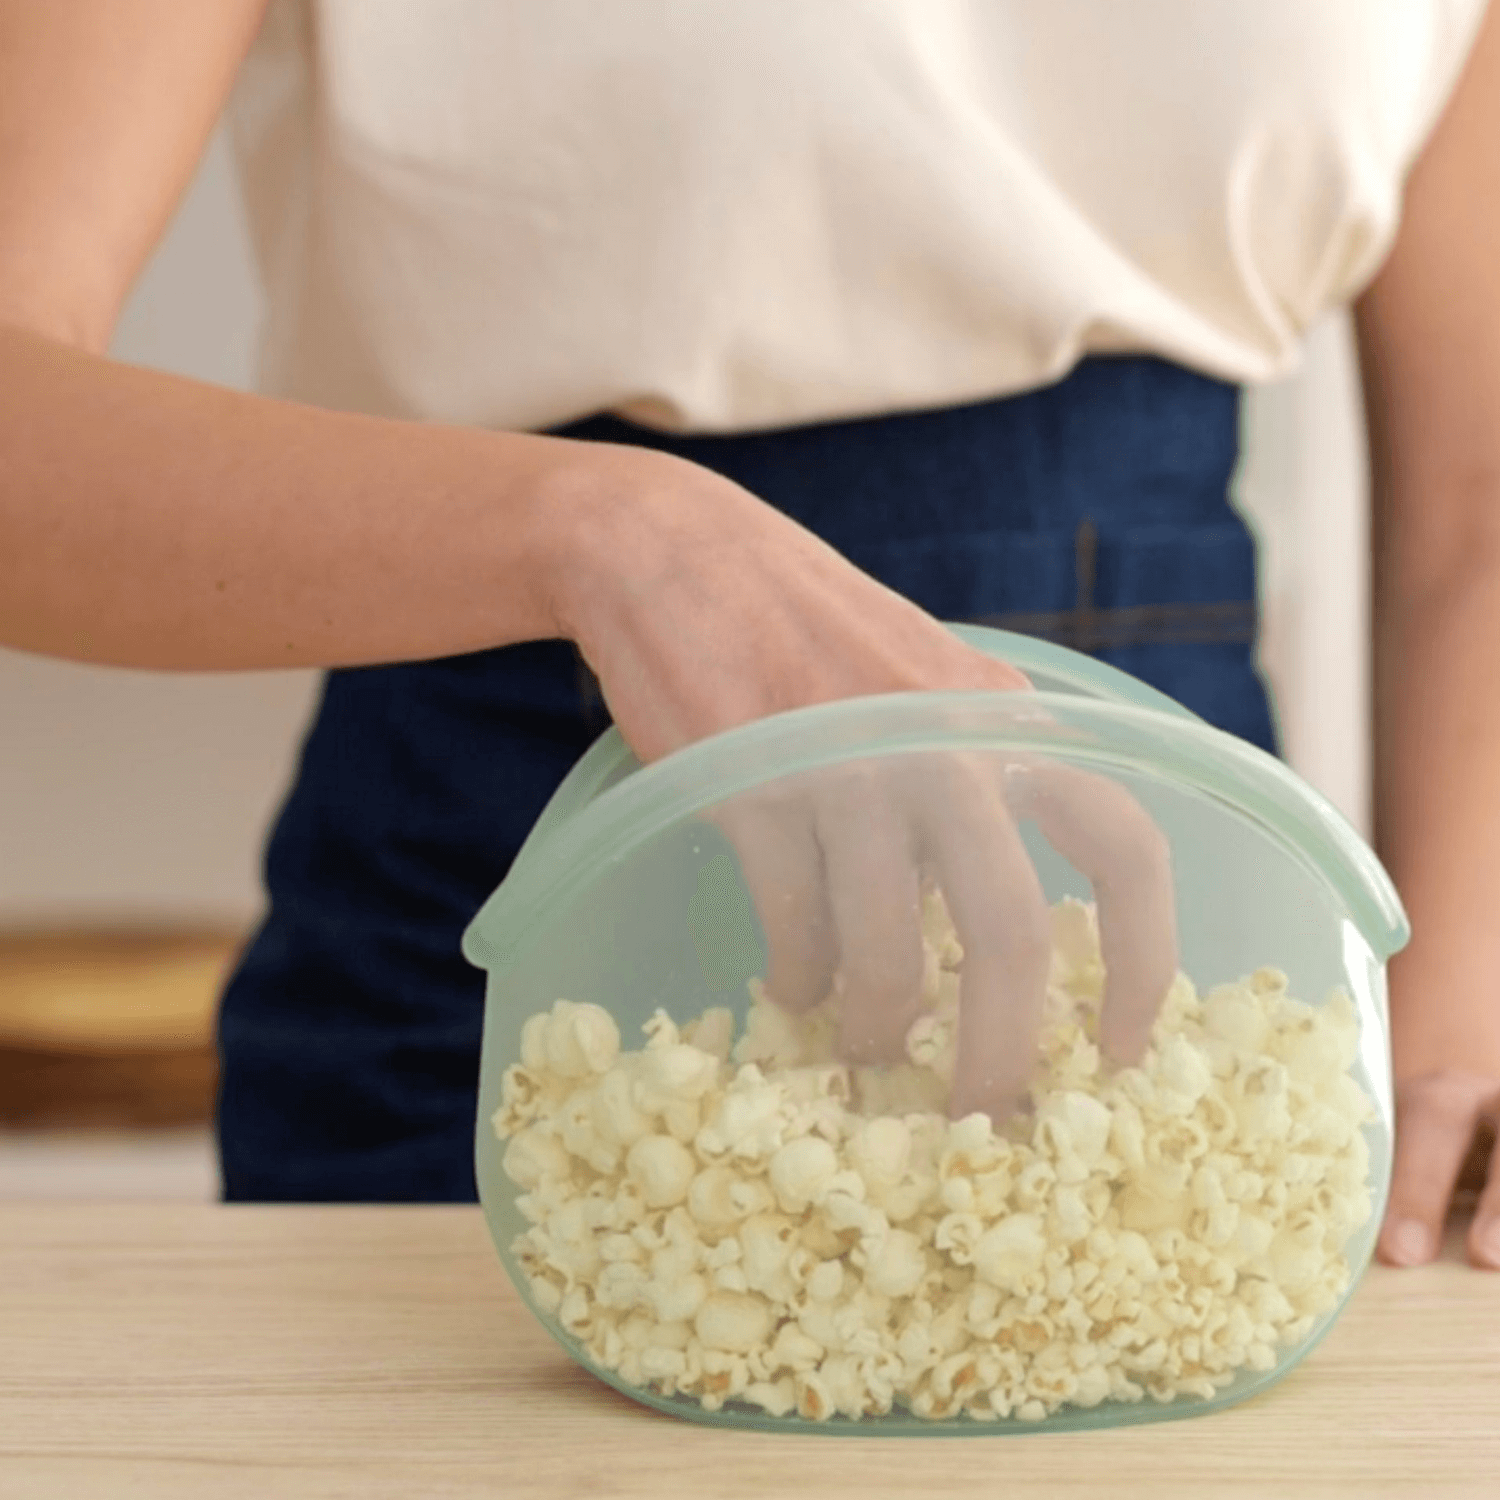 "Hand of a woman taking popcorn from a reusable Hugger bag as an alternative to plastic wrap"